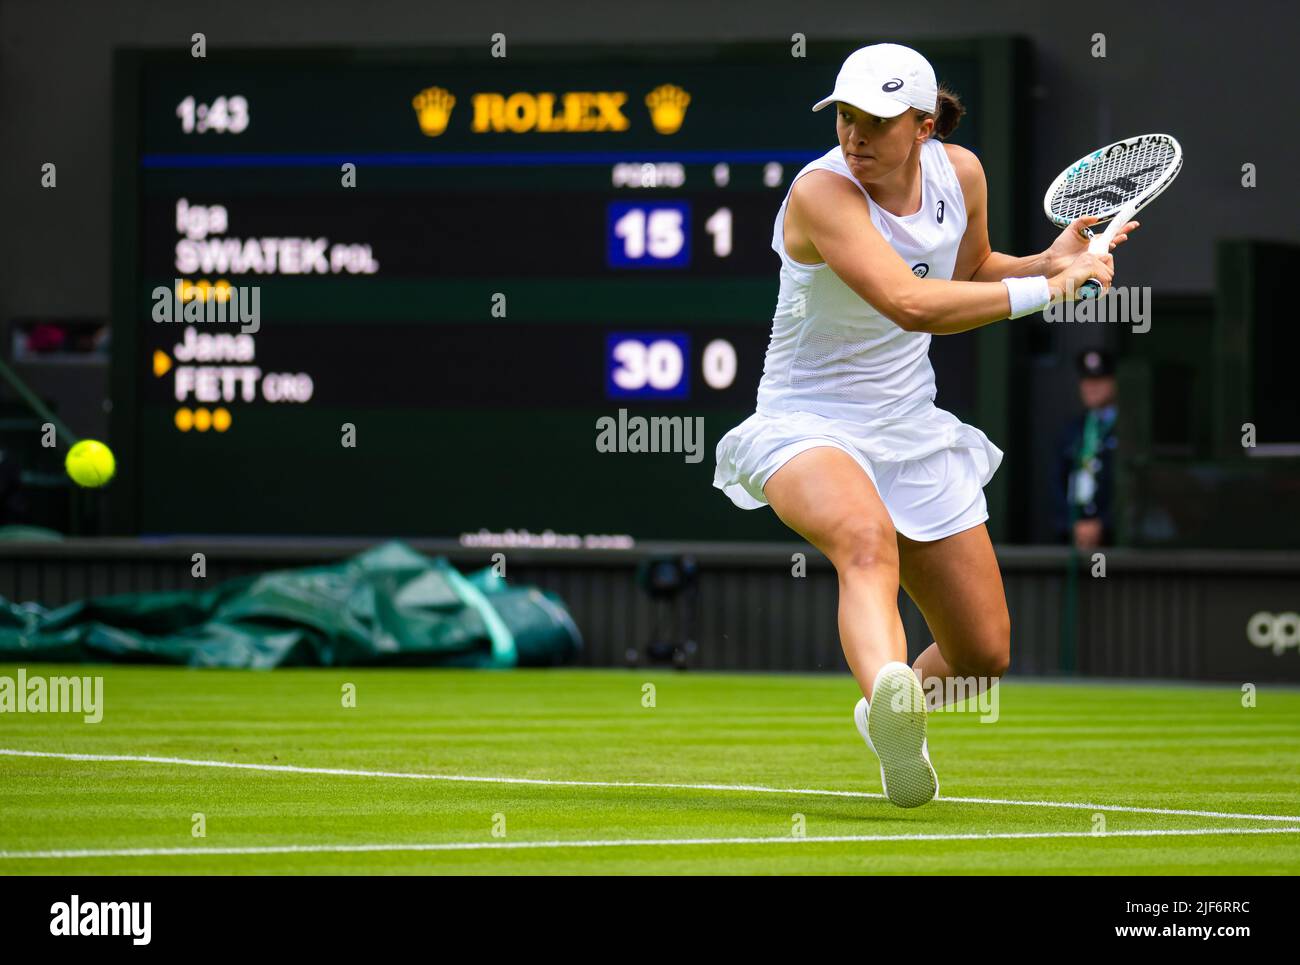 Iga Swiatek of Poland in action against Jana Fett of Croatia during the first round of the 2022 Wimbledon Championships, Grand Slam tennis tournament on June 28, 2022 at All England Lawn